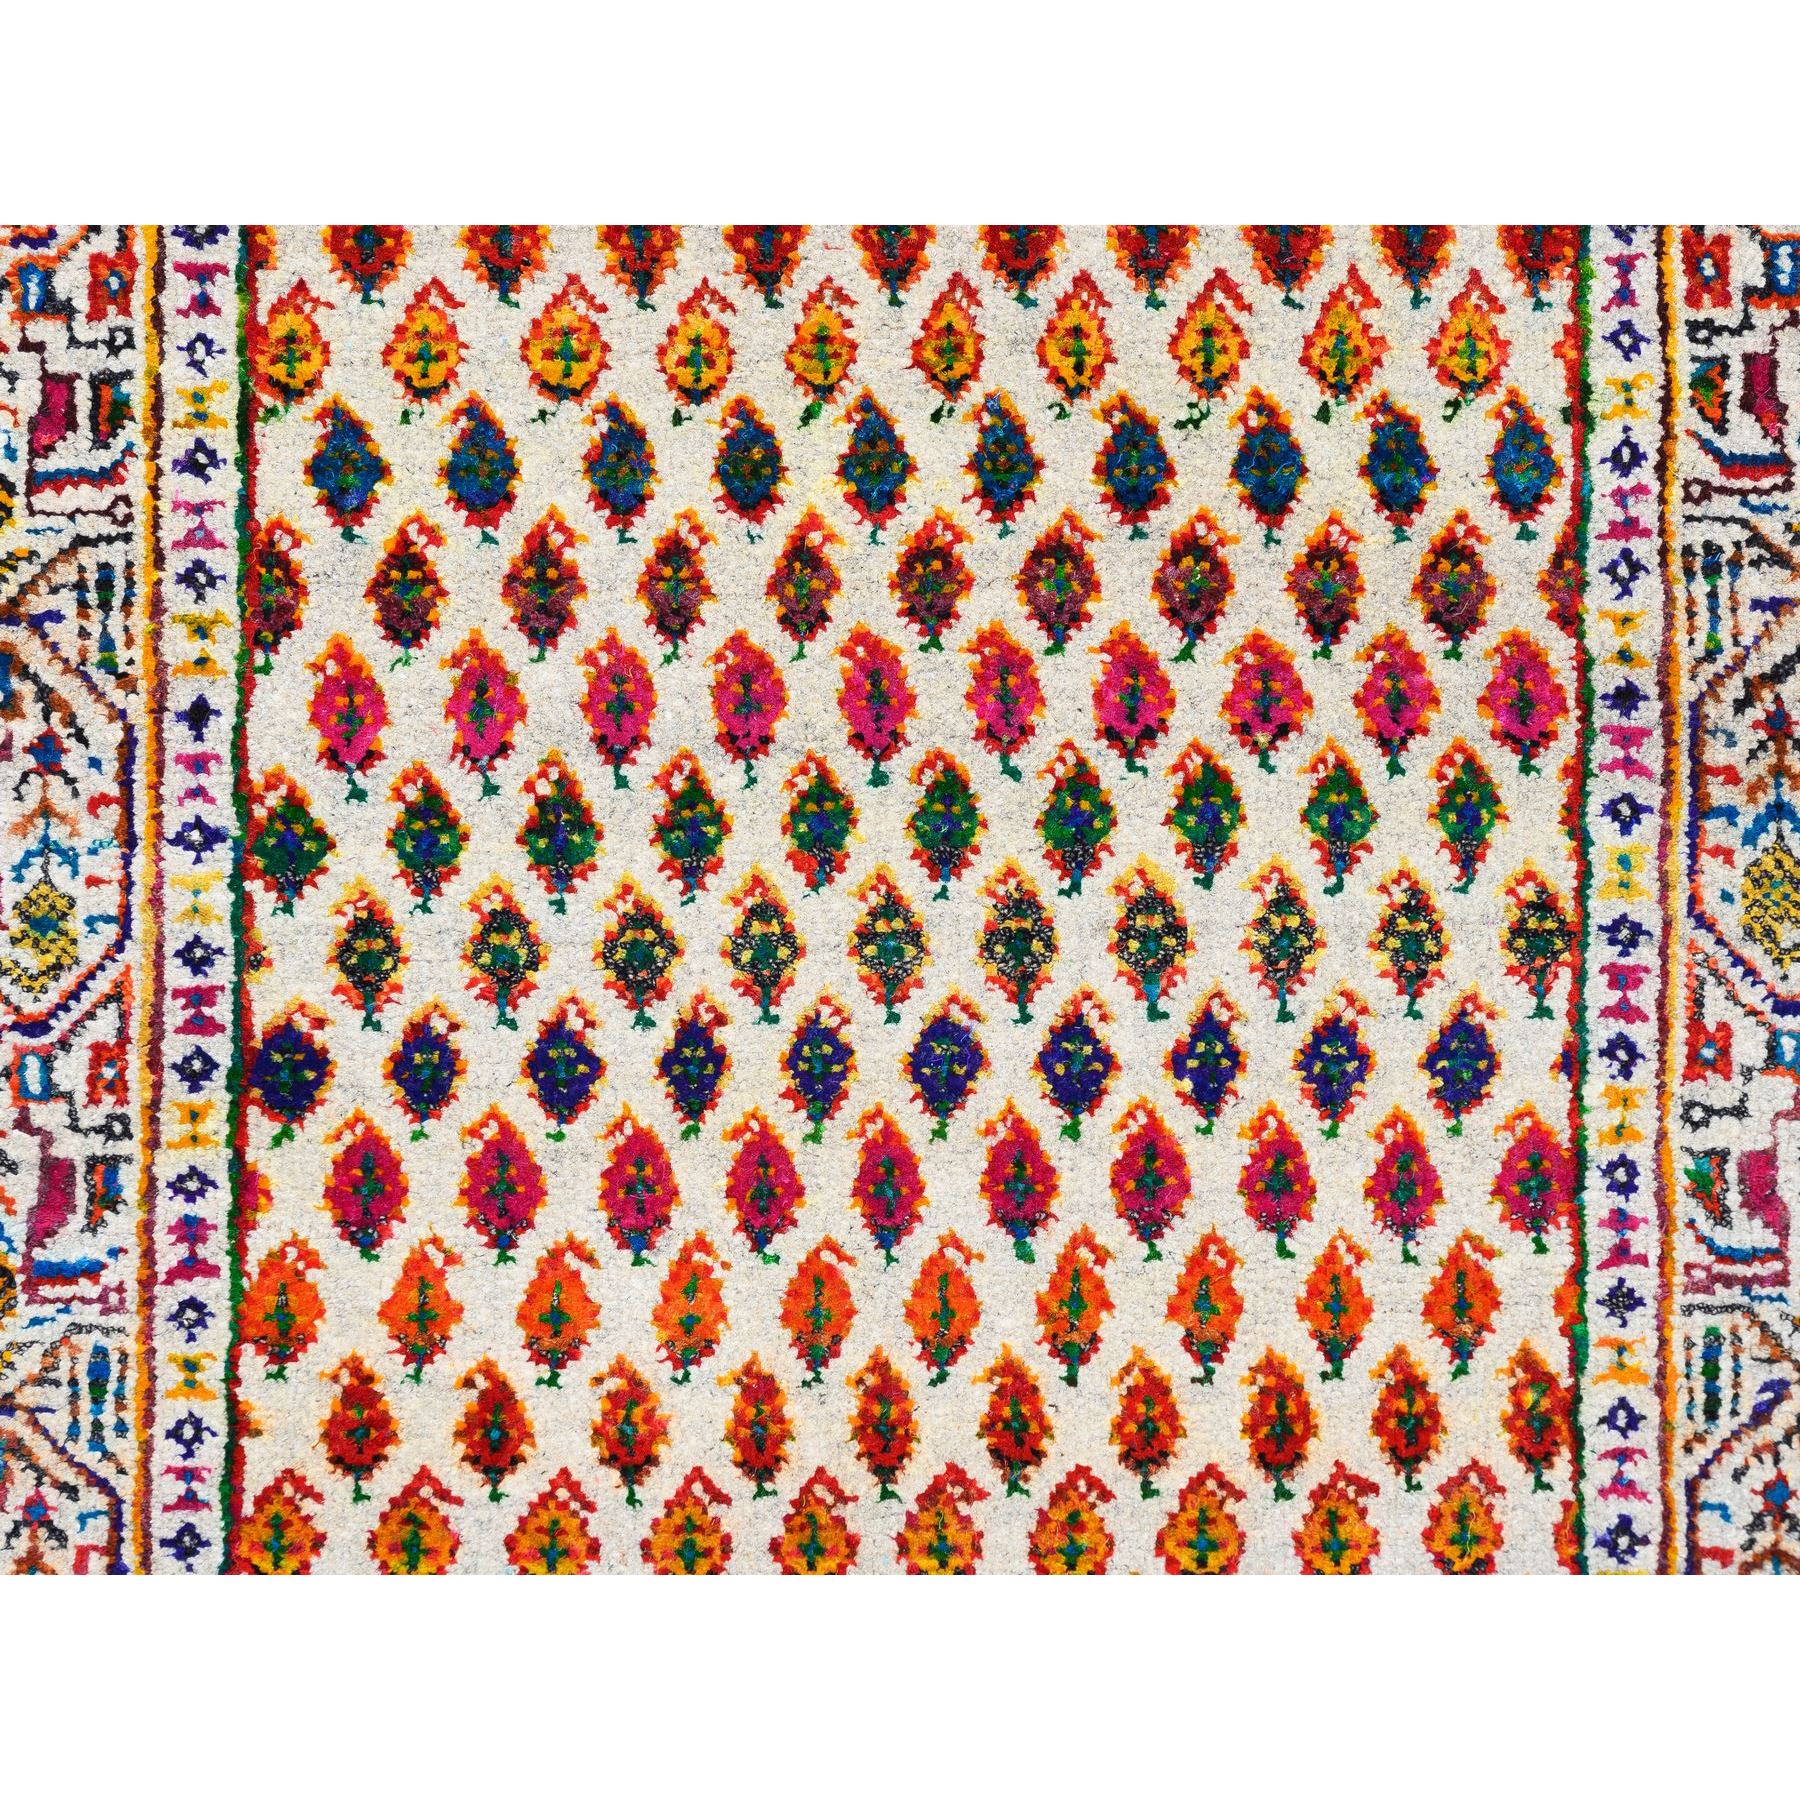 2'4"x10'2" Colorful Wool And Sari Silk Sarouk Mir Inspired With Repetitive Boteh Design Hand Woven Oriental Runner Rug 